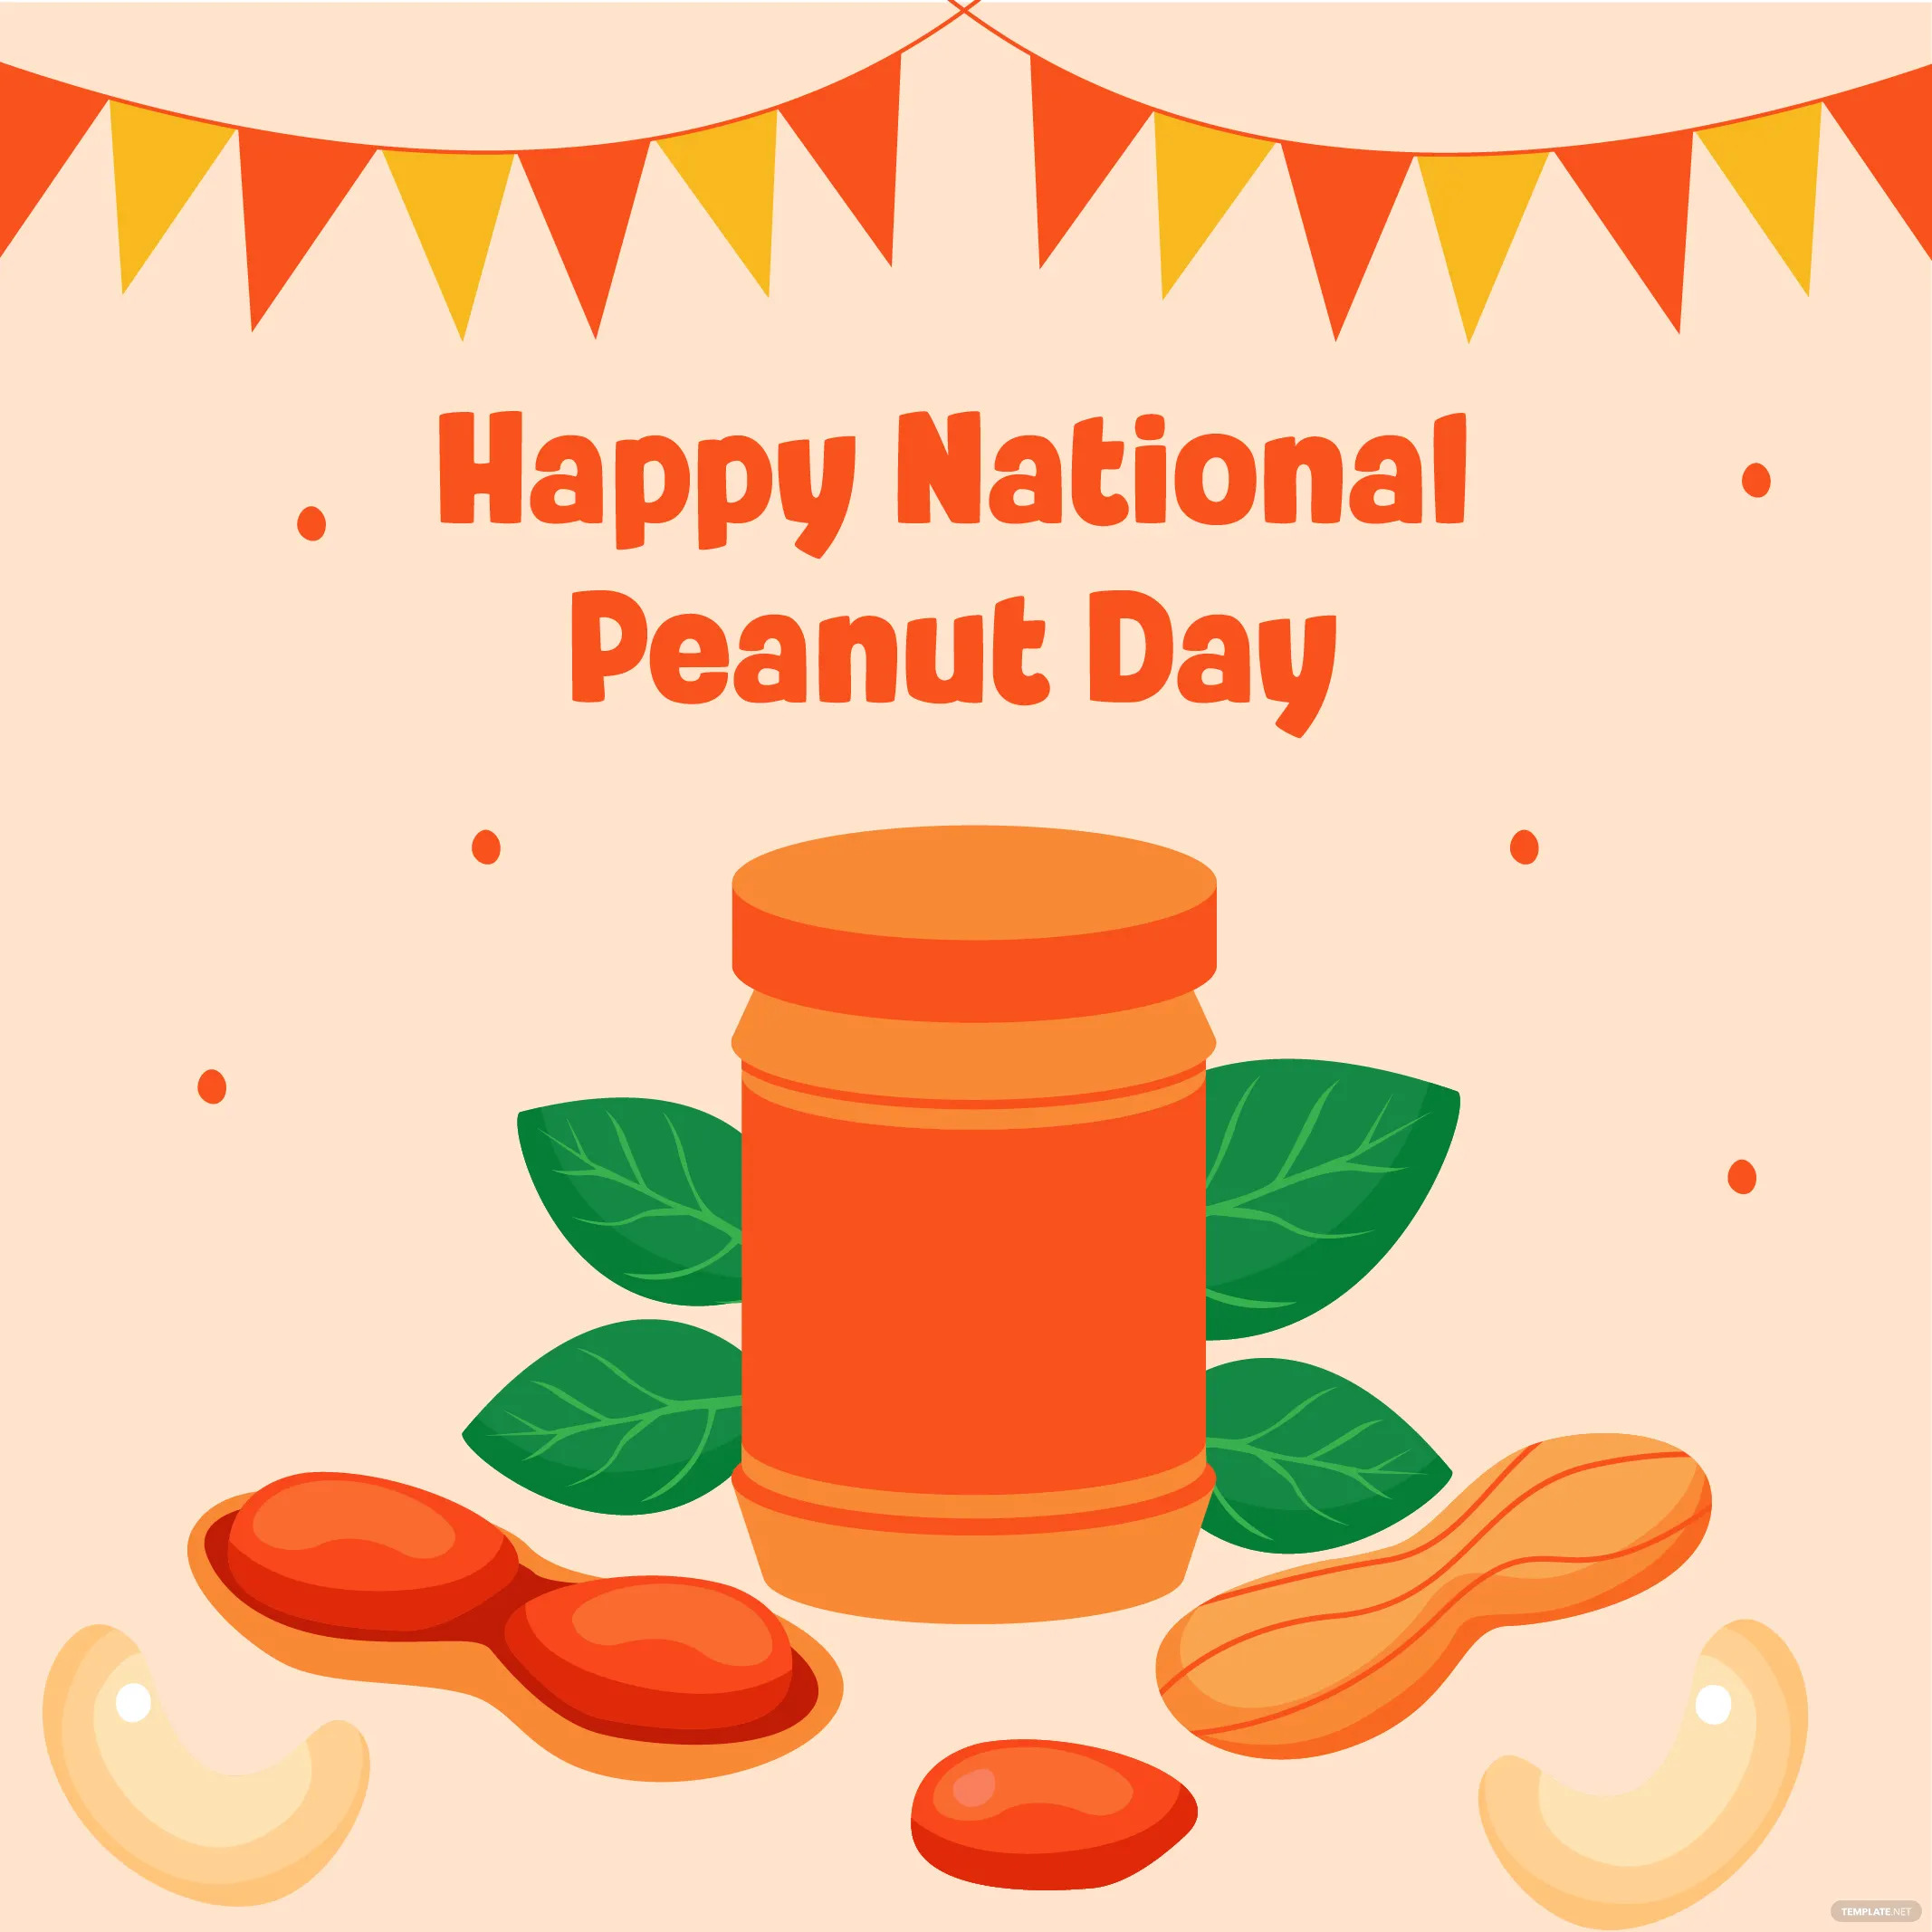 National Peanut Day When Is National Peanut Day? Meaning, Dates, Purpose